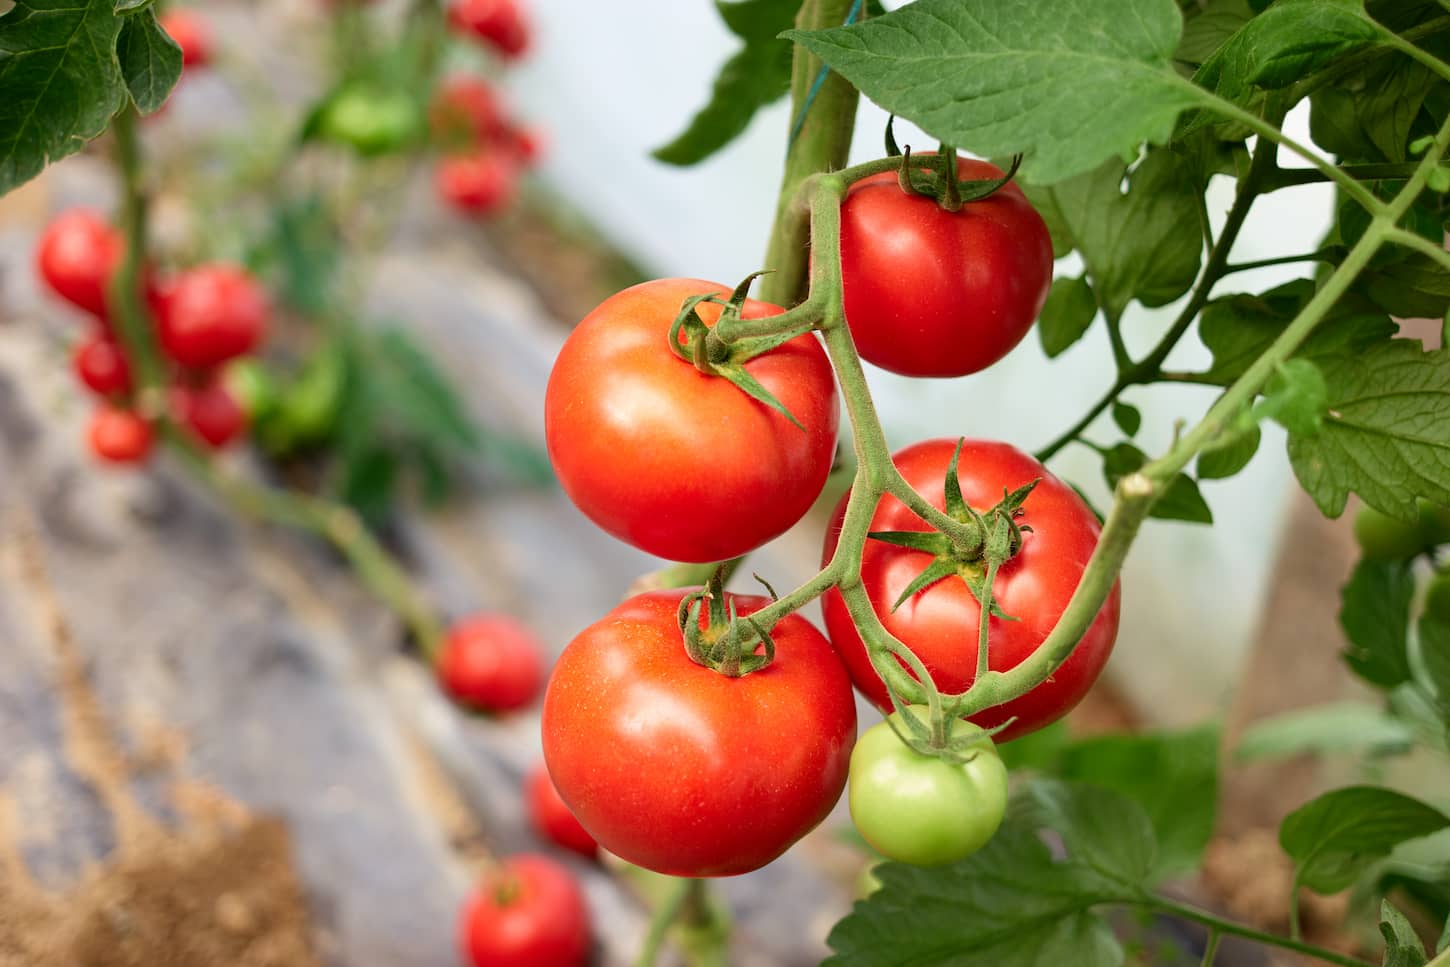 Can Tomatoes Grow in Indirect Sunlight?